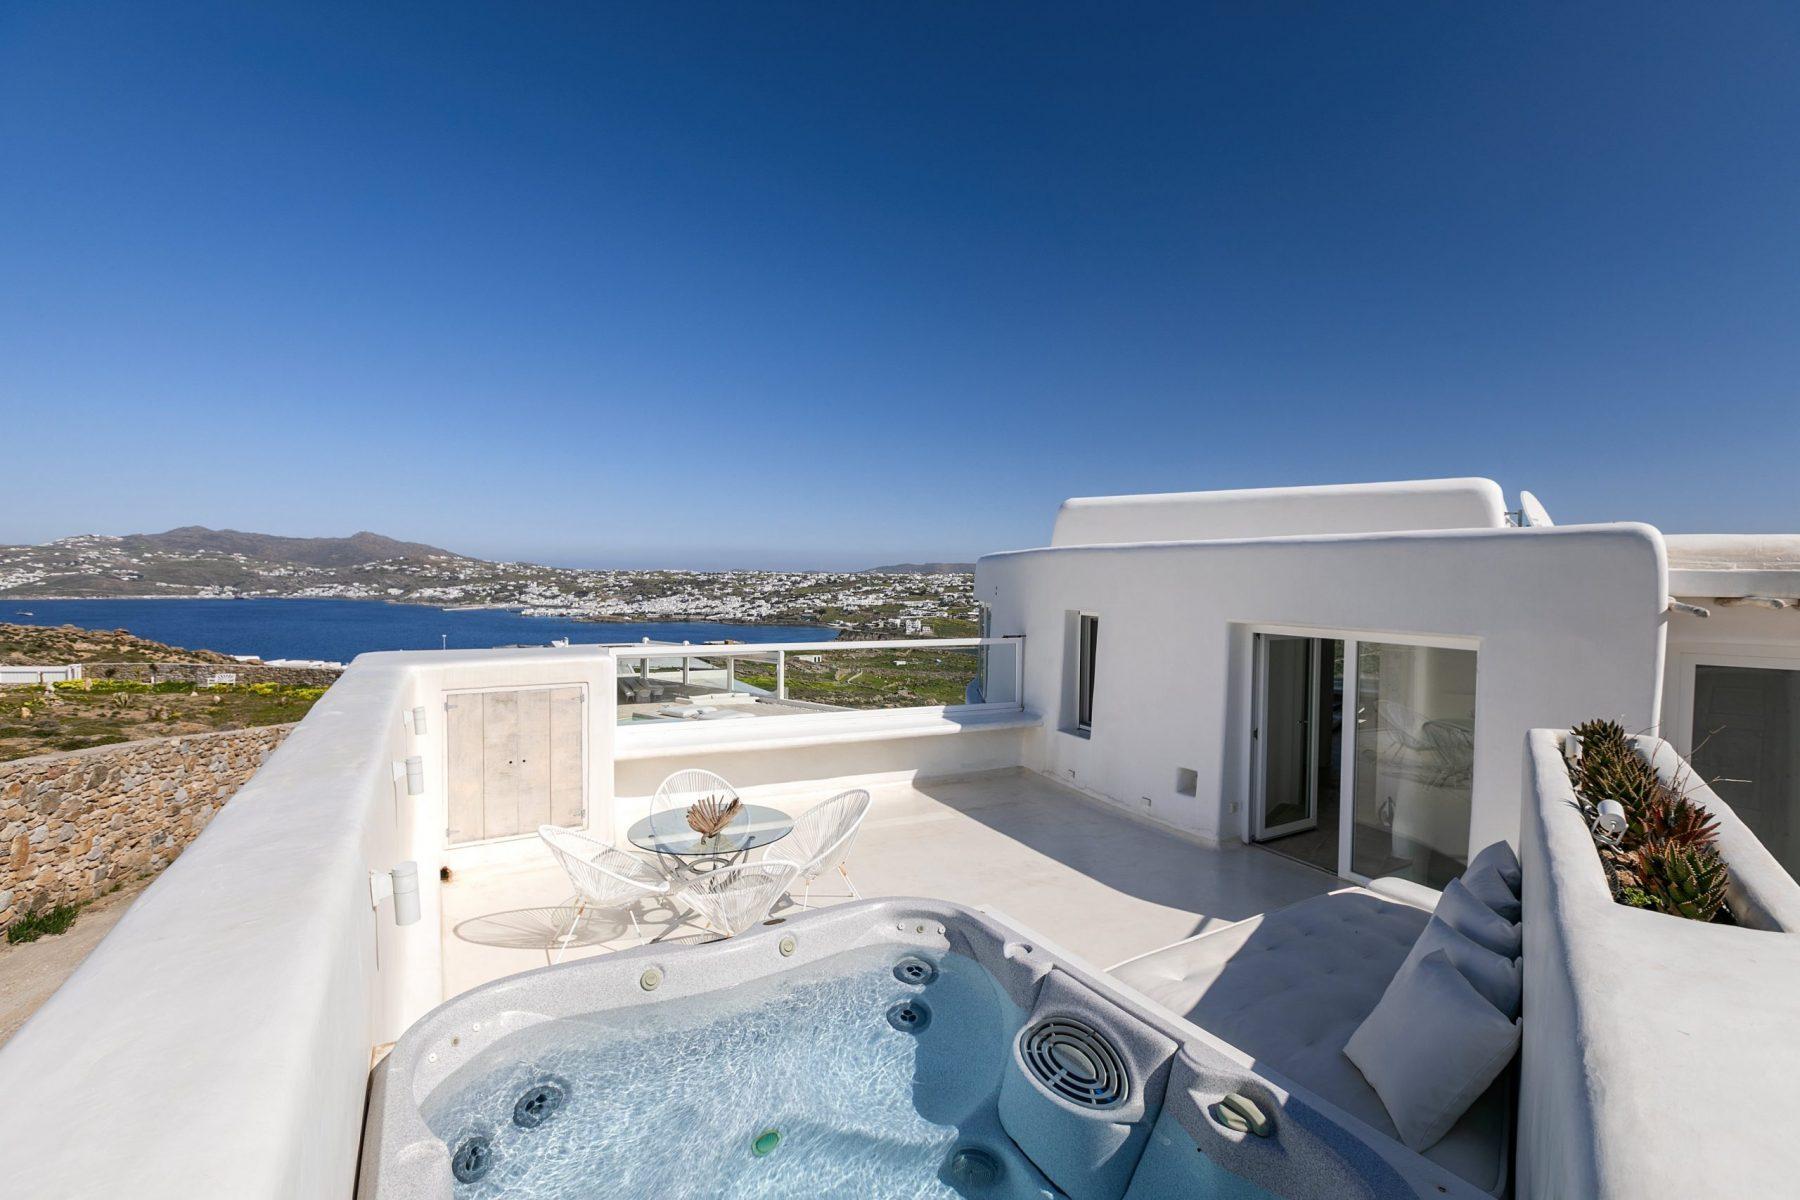 A balcony of a villa with a jacuzzi